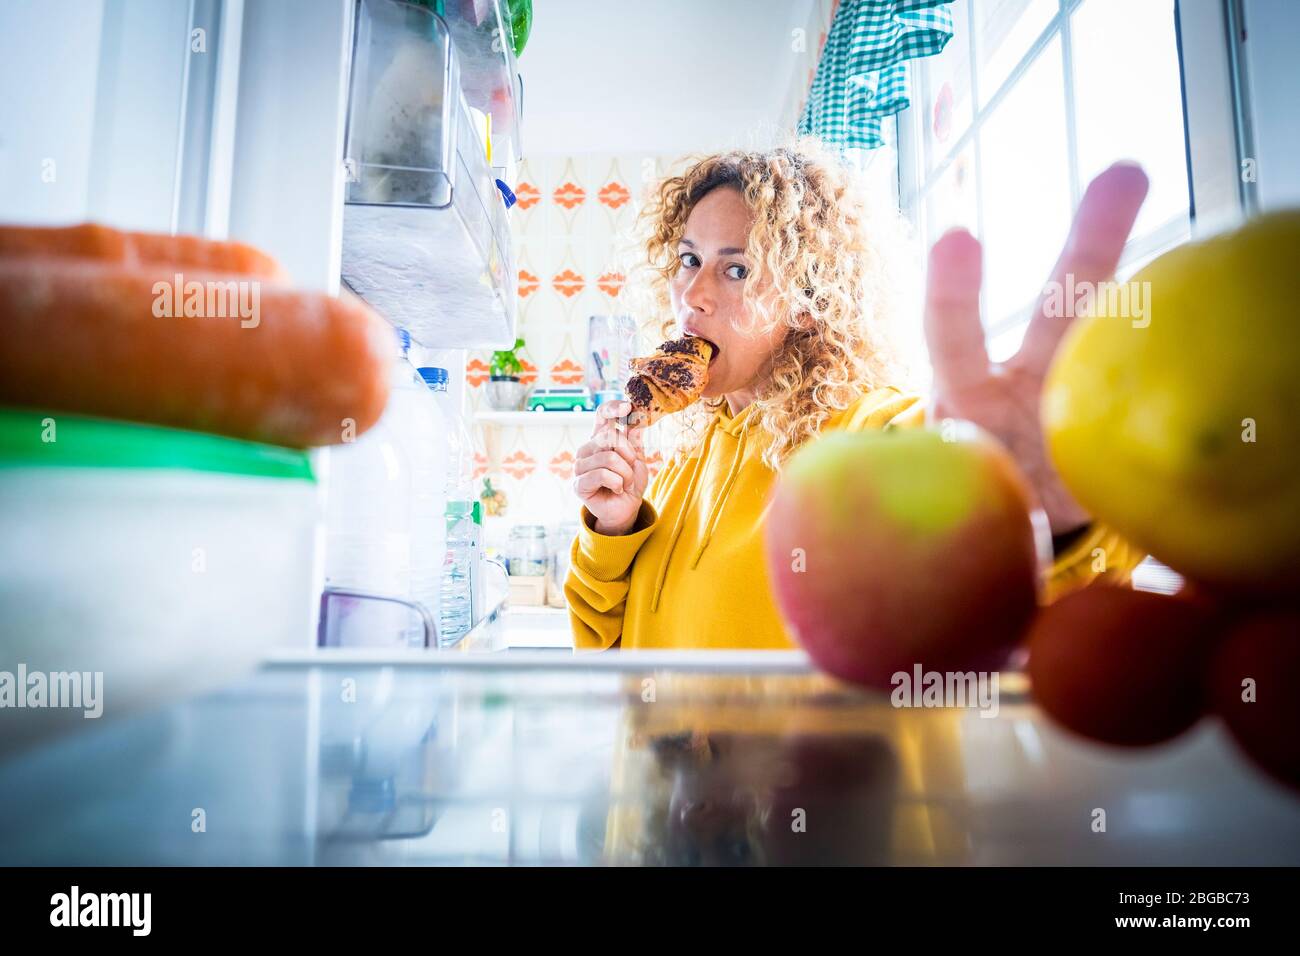 Alternaive inside view of Beautiful hungry adult woman eat tasty croissant with chocolate and open the fridge to take off some food -  concept of coro Stock Photo